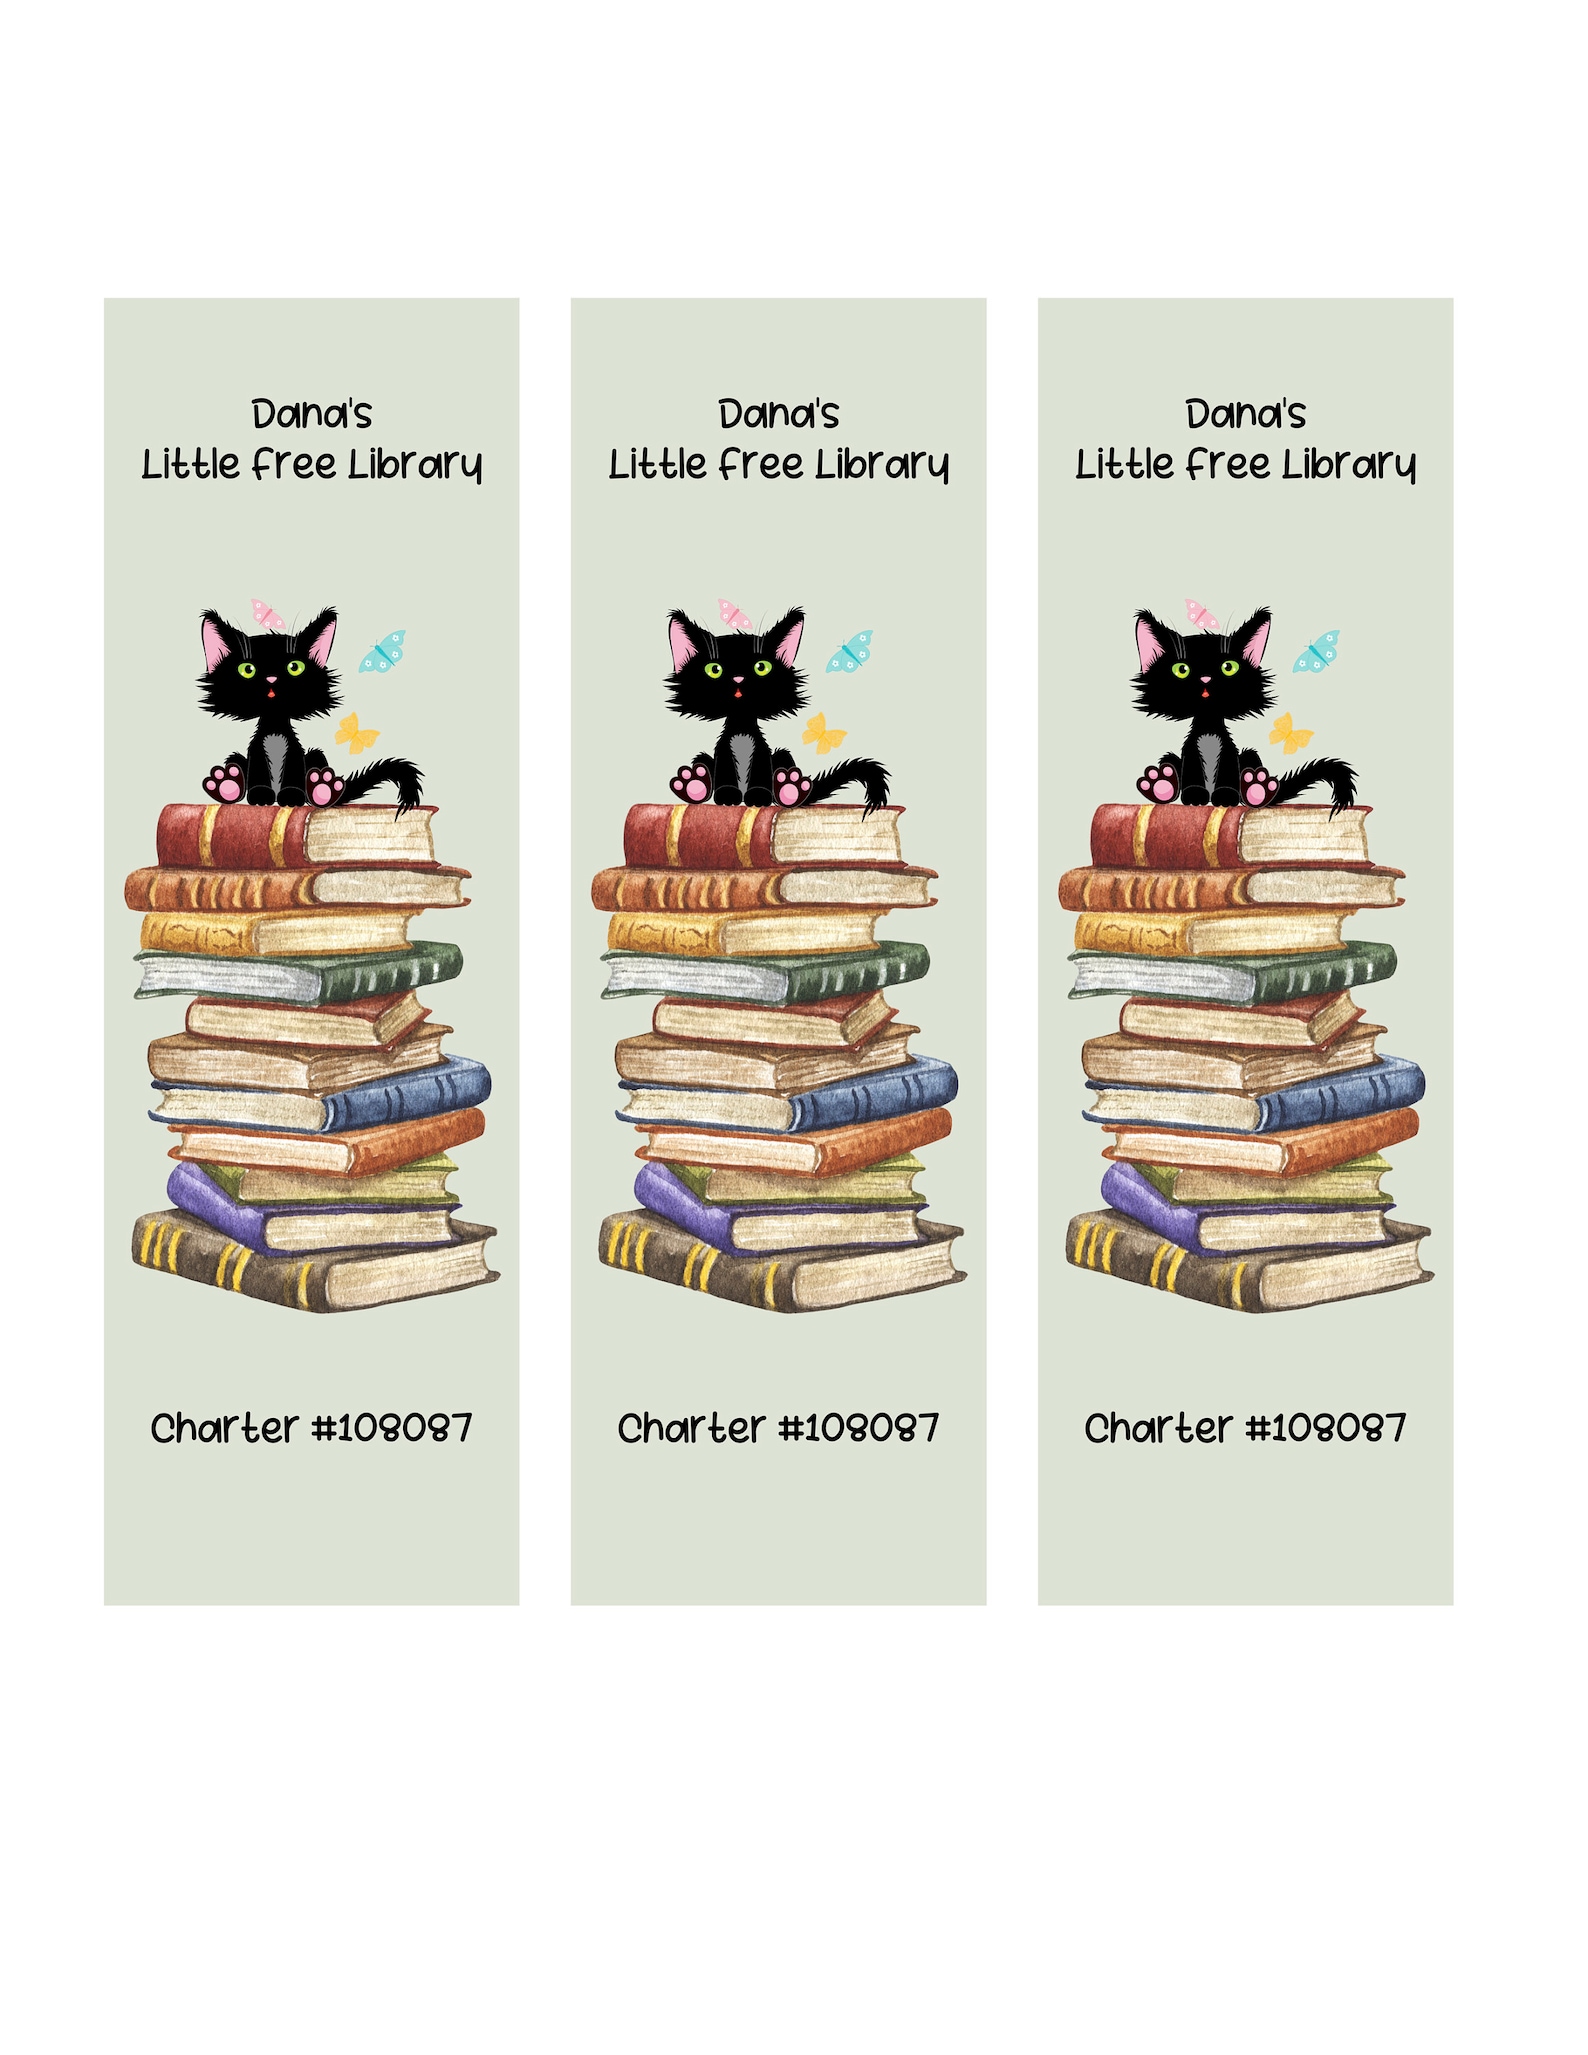 Set of bookmarks that can be customized to advertise your LFL, with a black cat on a stack of books.